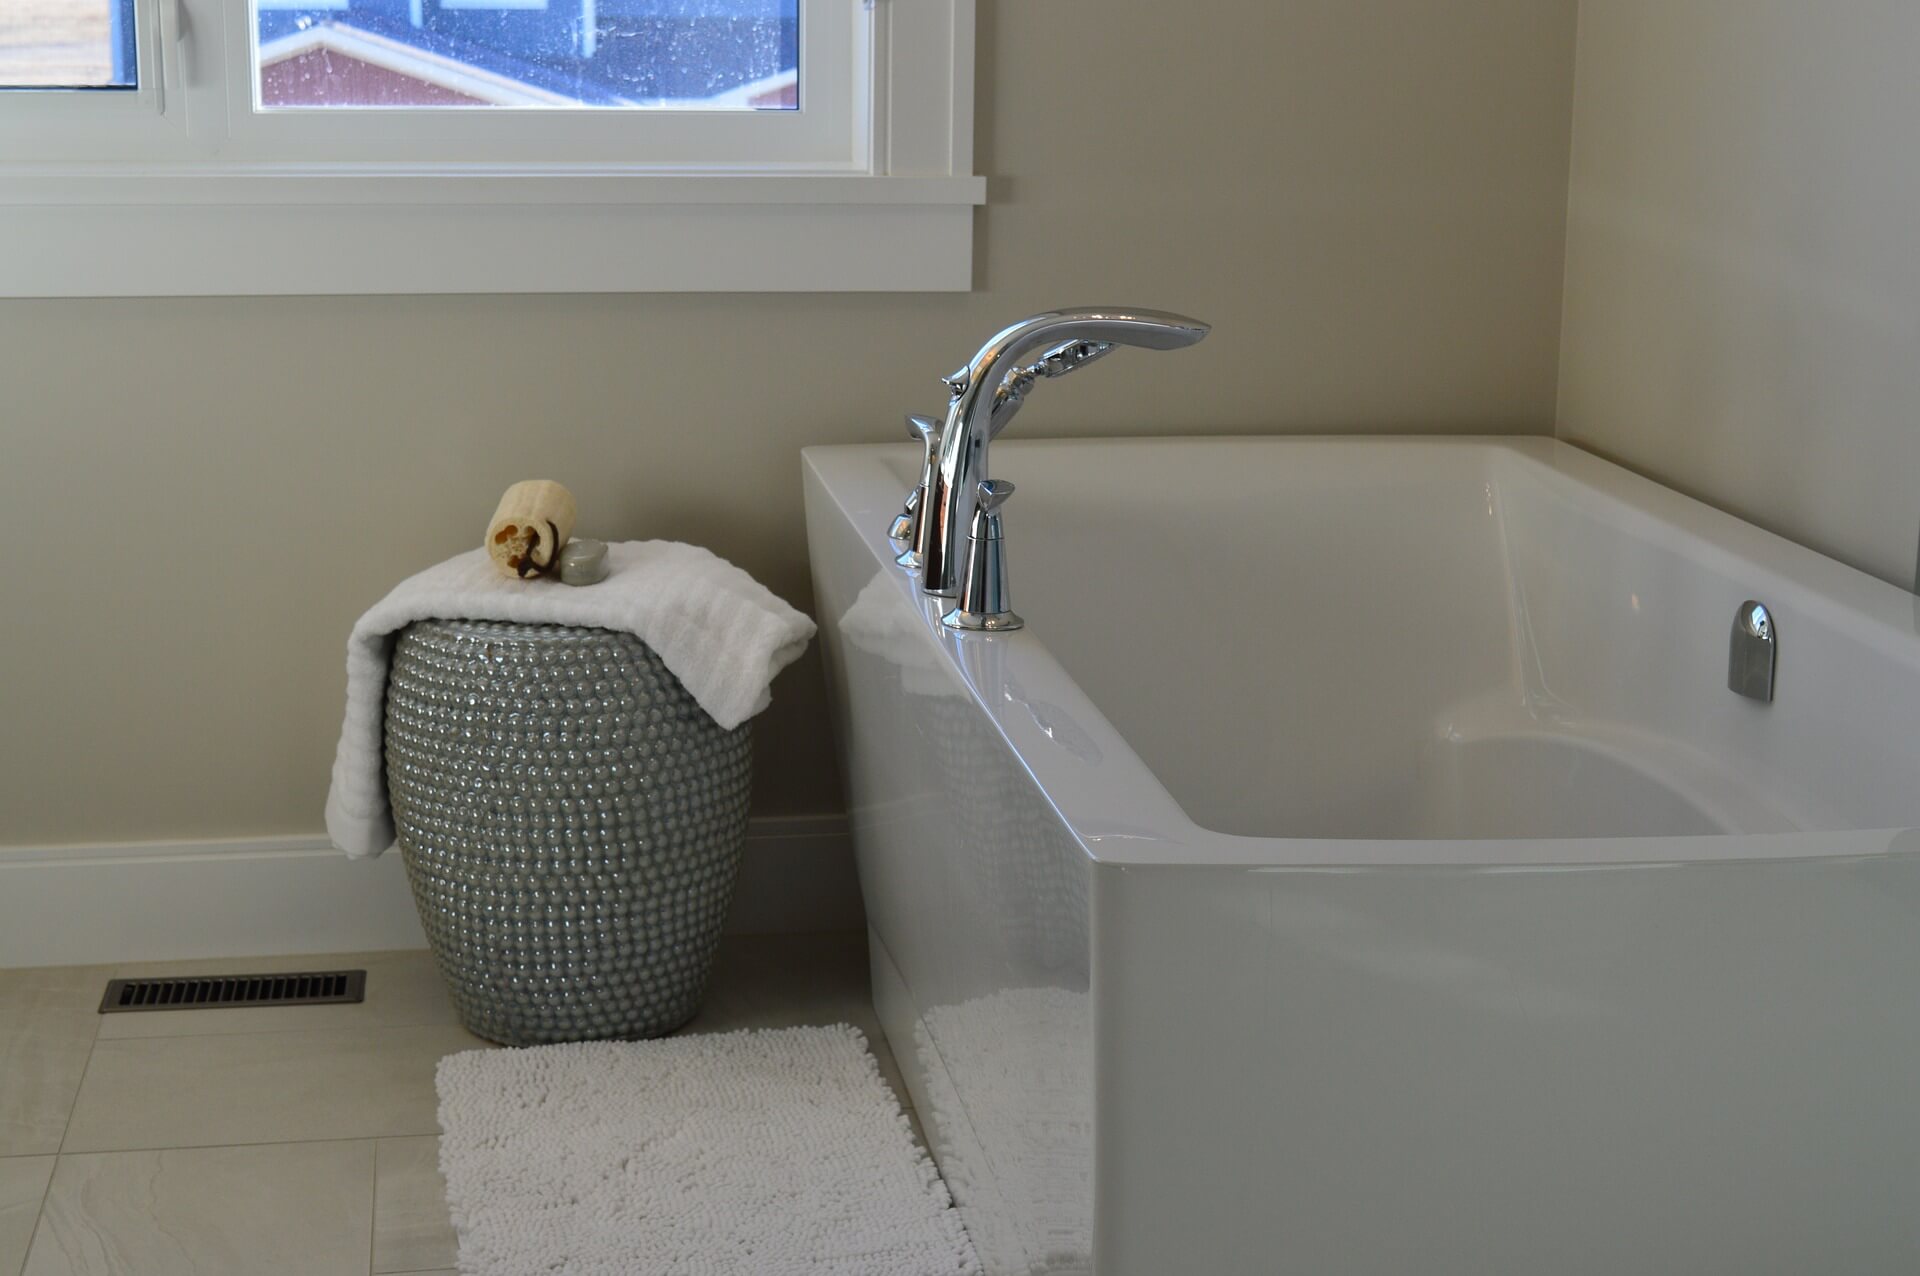 How To Clean Bathtub Stains Best Diy, How To Clean An Old Bathtub